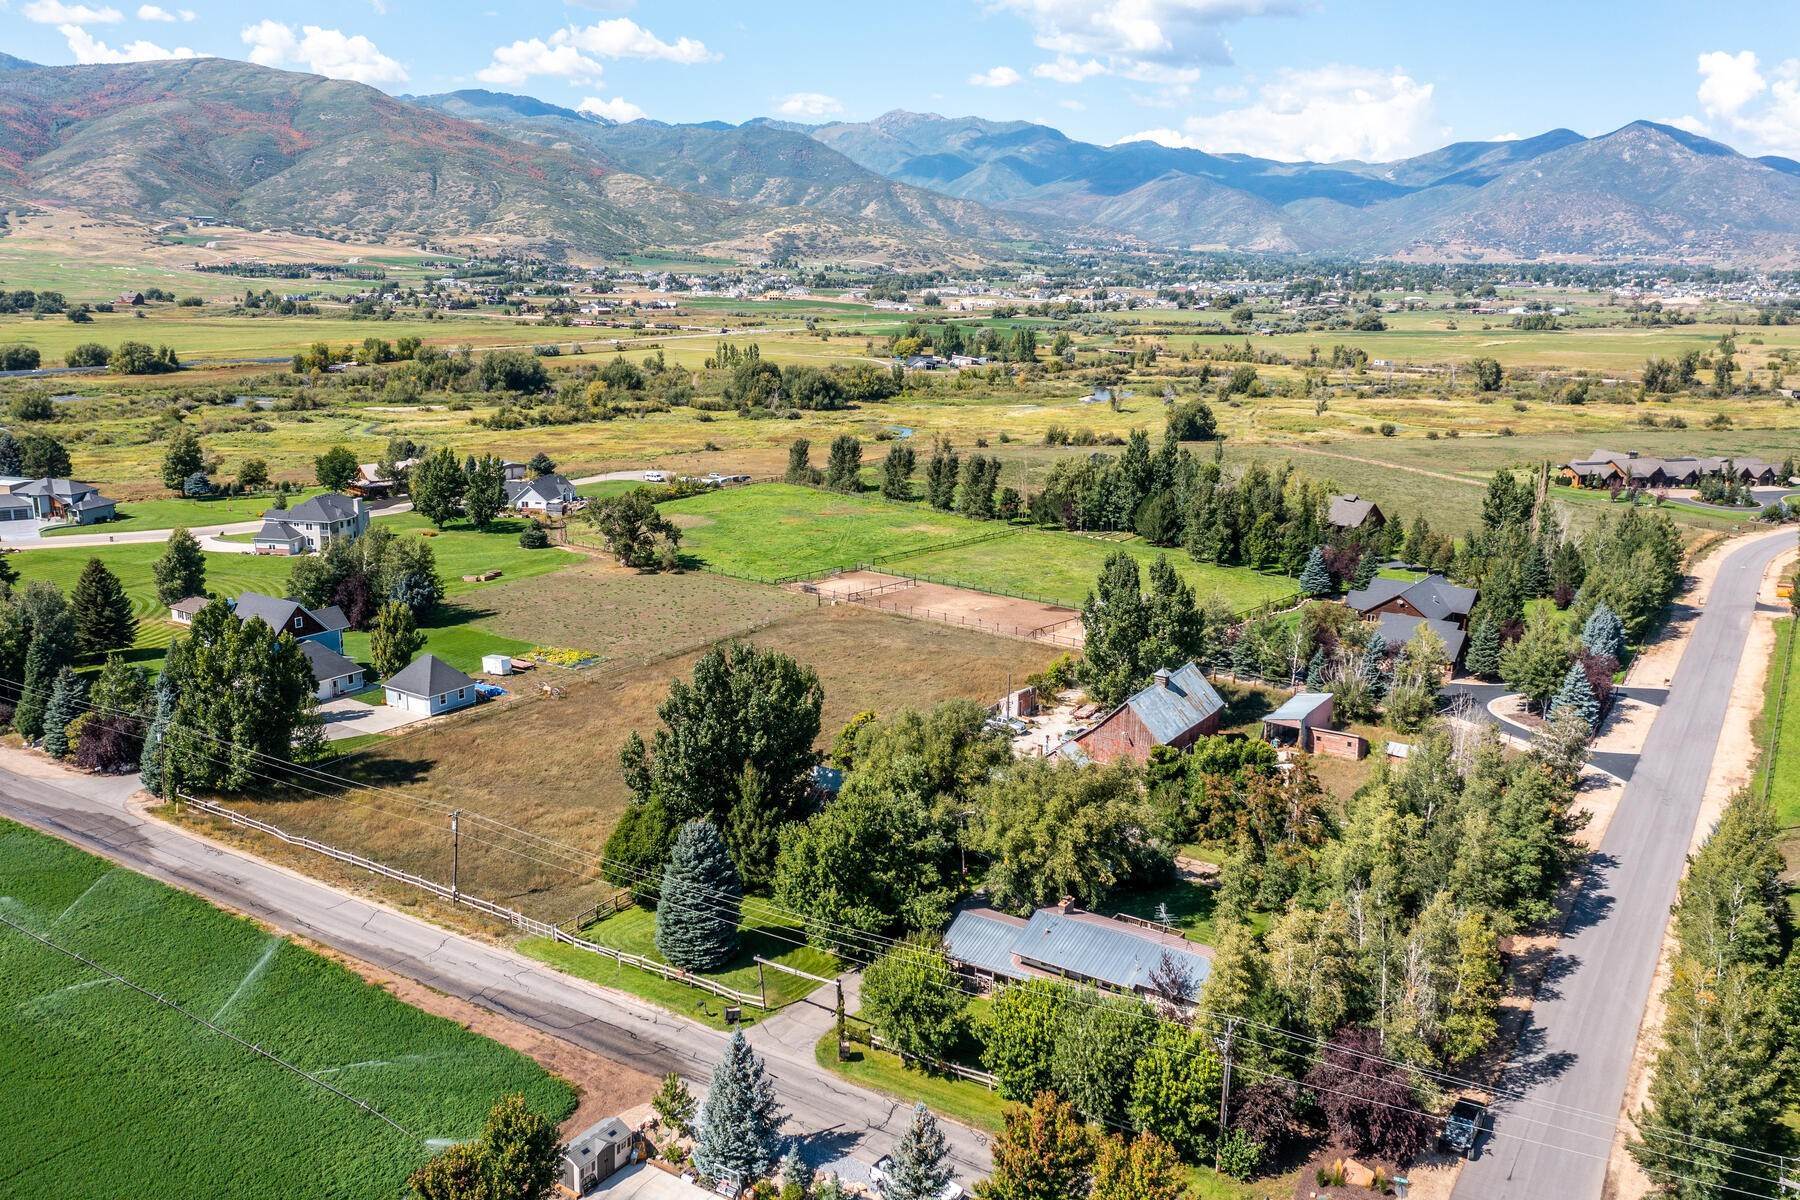 43. Farm and Ranch Properties for Sale at 3 Acres, Winterton barn, Subdividable, Limitless Potential! 3040 West 2400 South Heber City, Utah 84032 United States